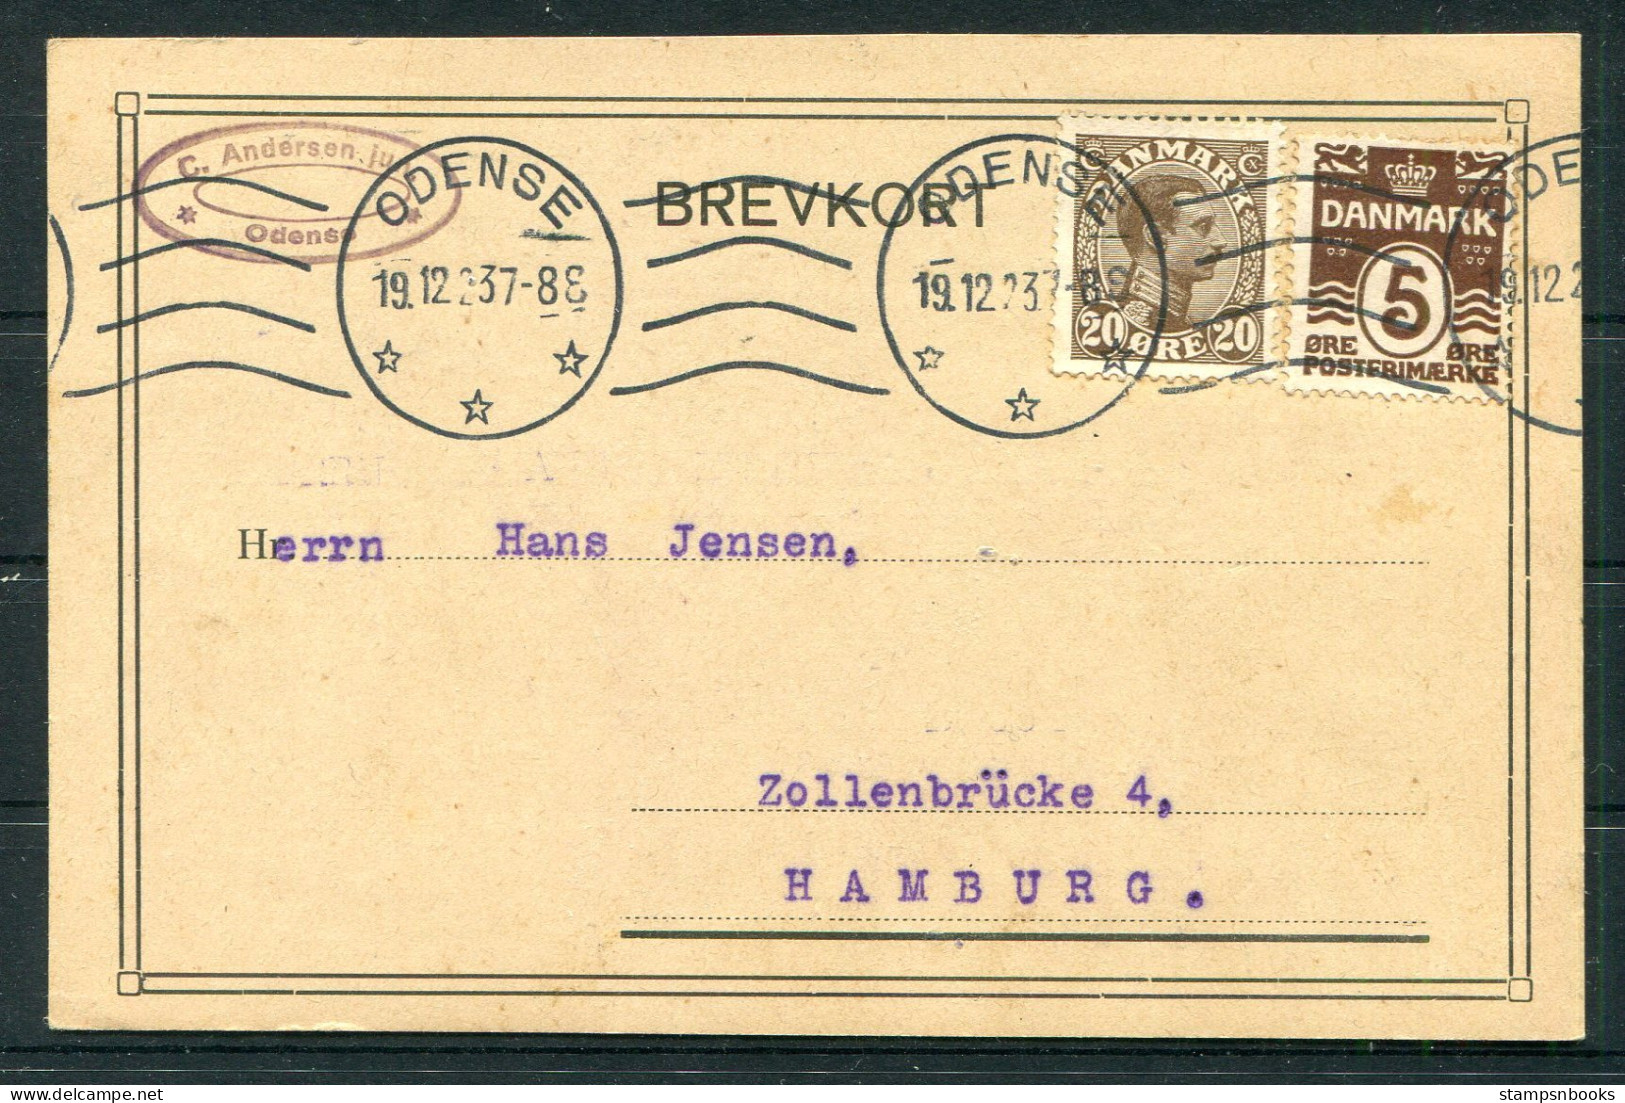 1923 Denmark Odense Business Postcard - Hamburg Germany  - Covers & Documents